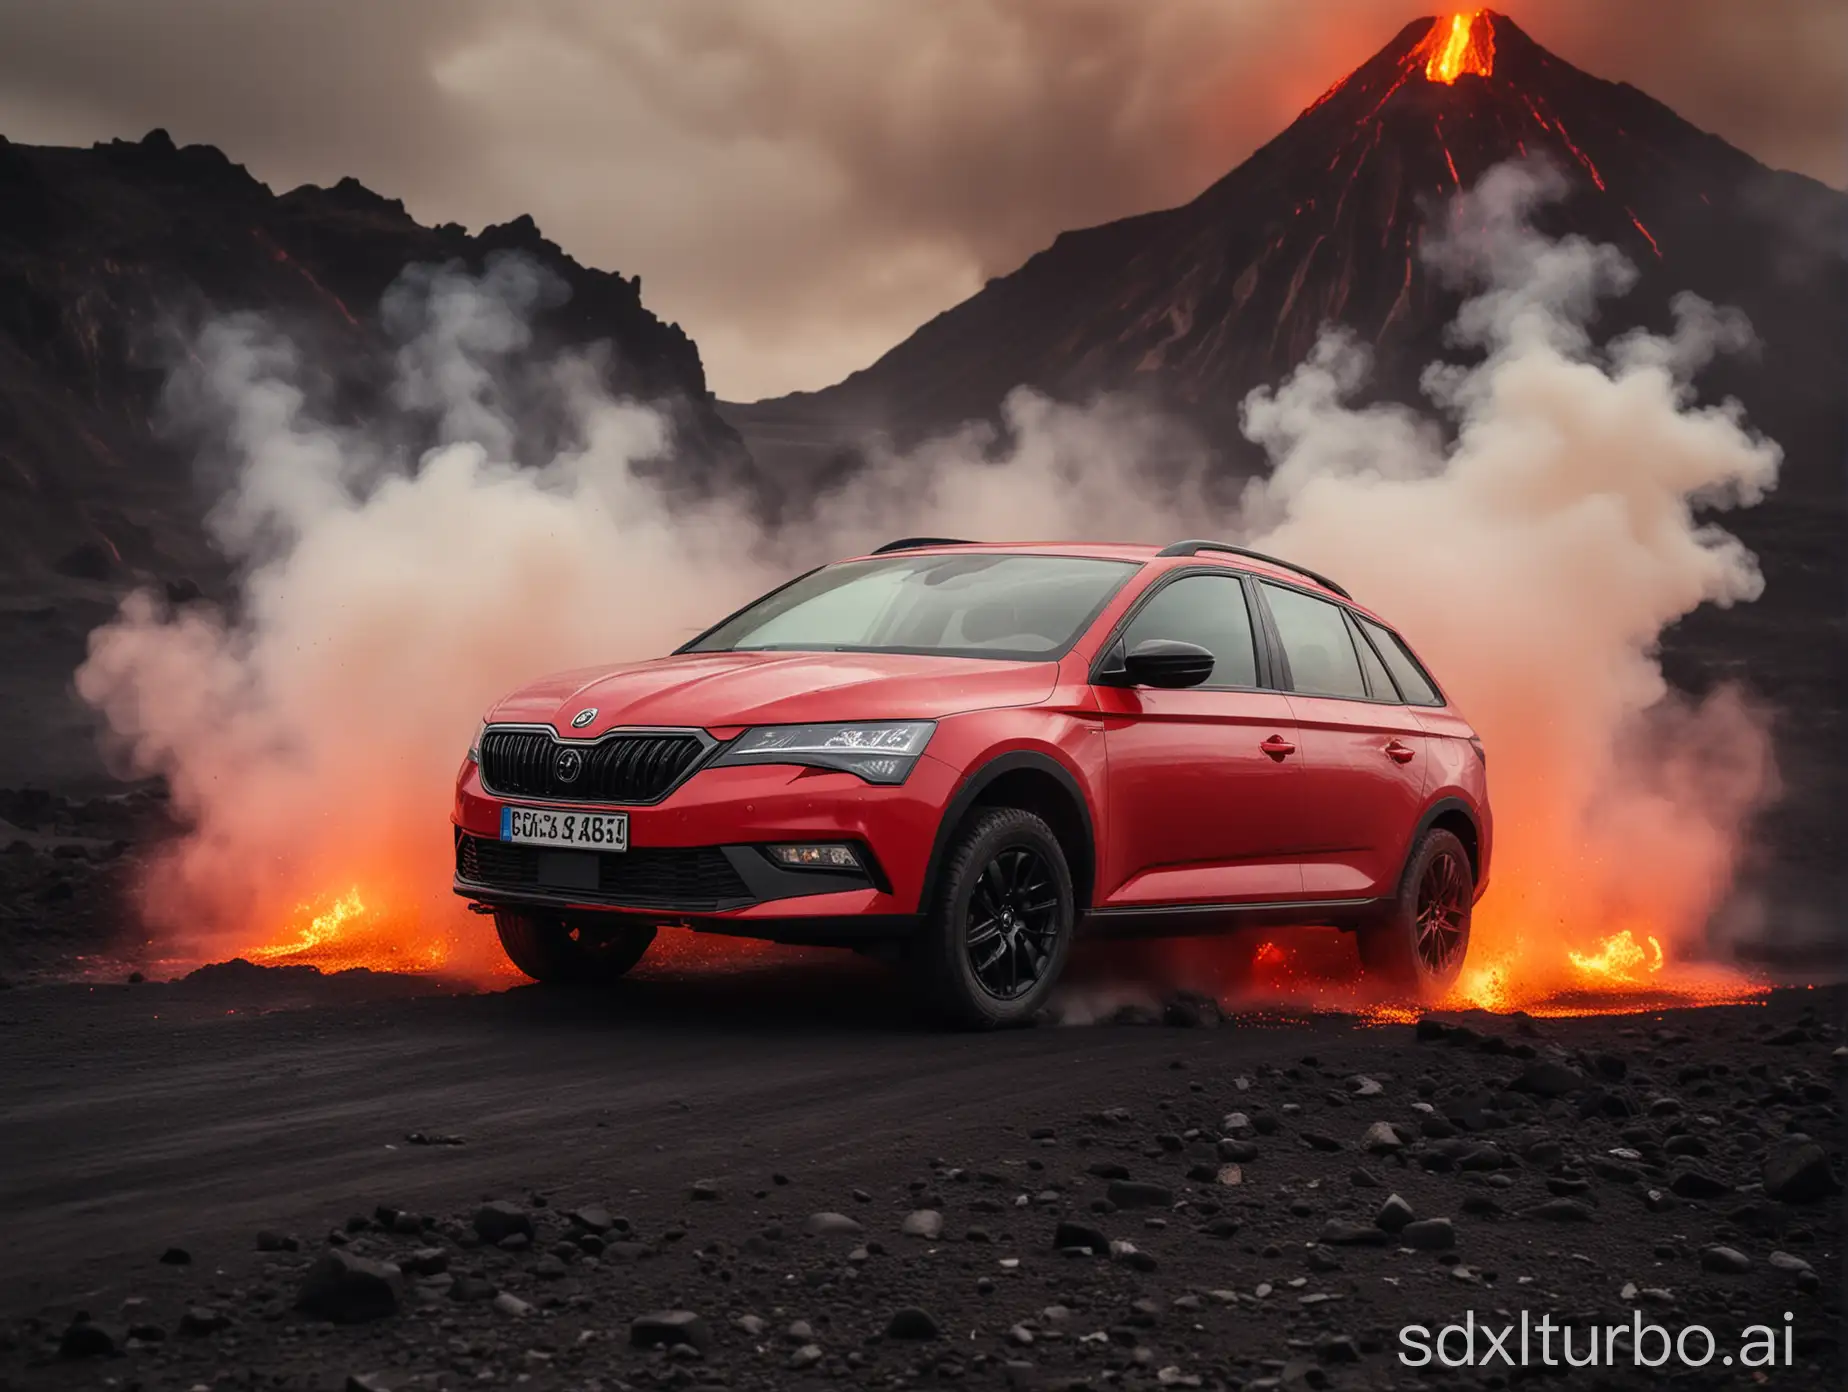 professional front portrait photo of Skoda Scala car driving over black dirt road surrounded by glowing hot lava field on both road sides. Extensive smoke coming from lava.Volcano in far background. Matte red paint. Offroad bumper. offroad roof racks. Bokeh. Shot taken from front